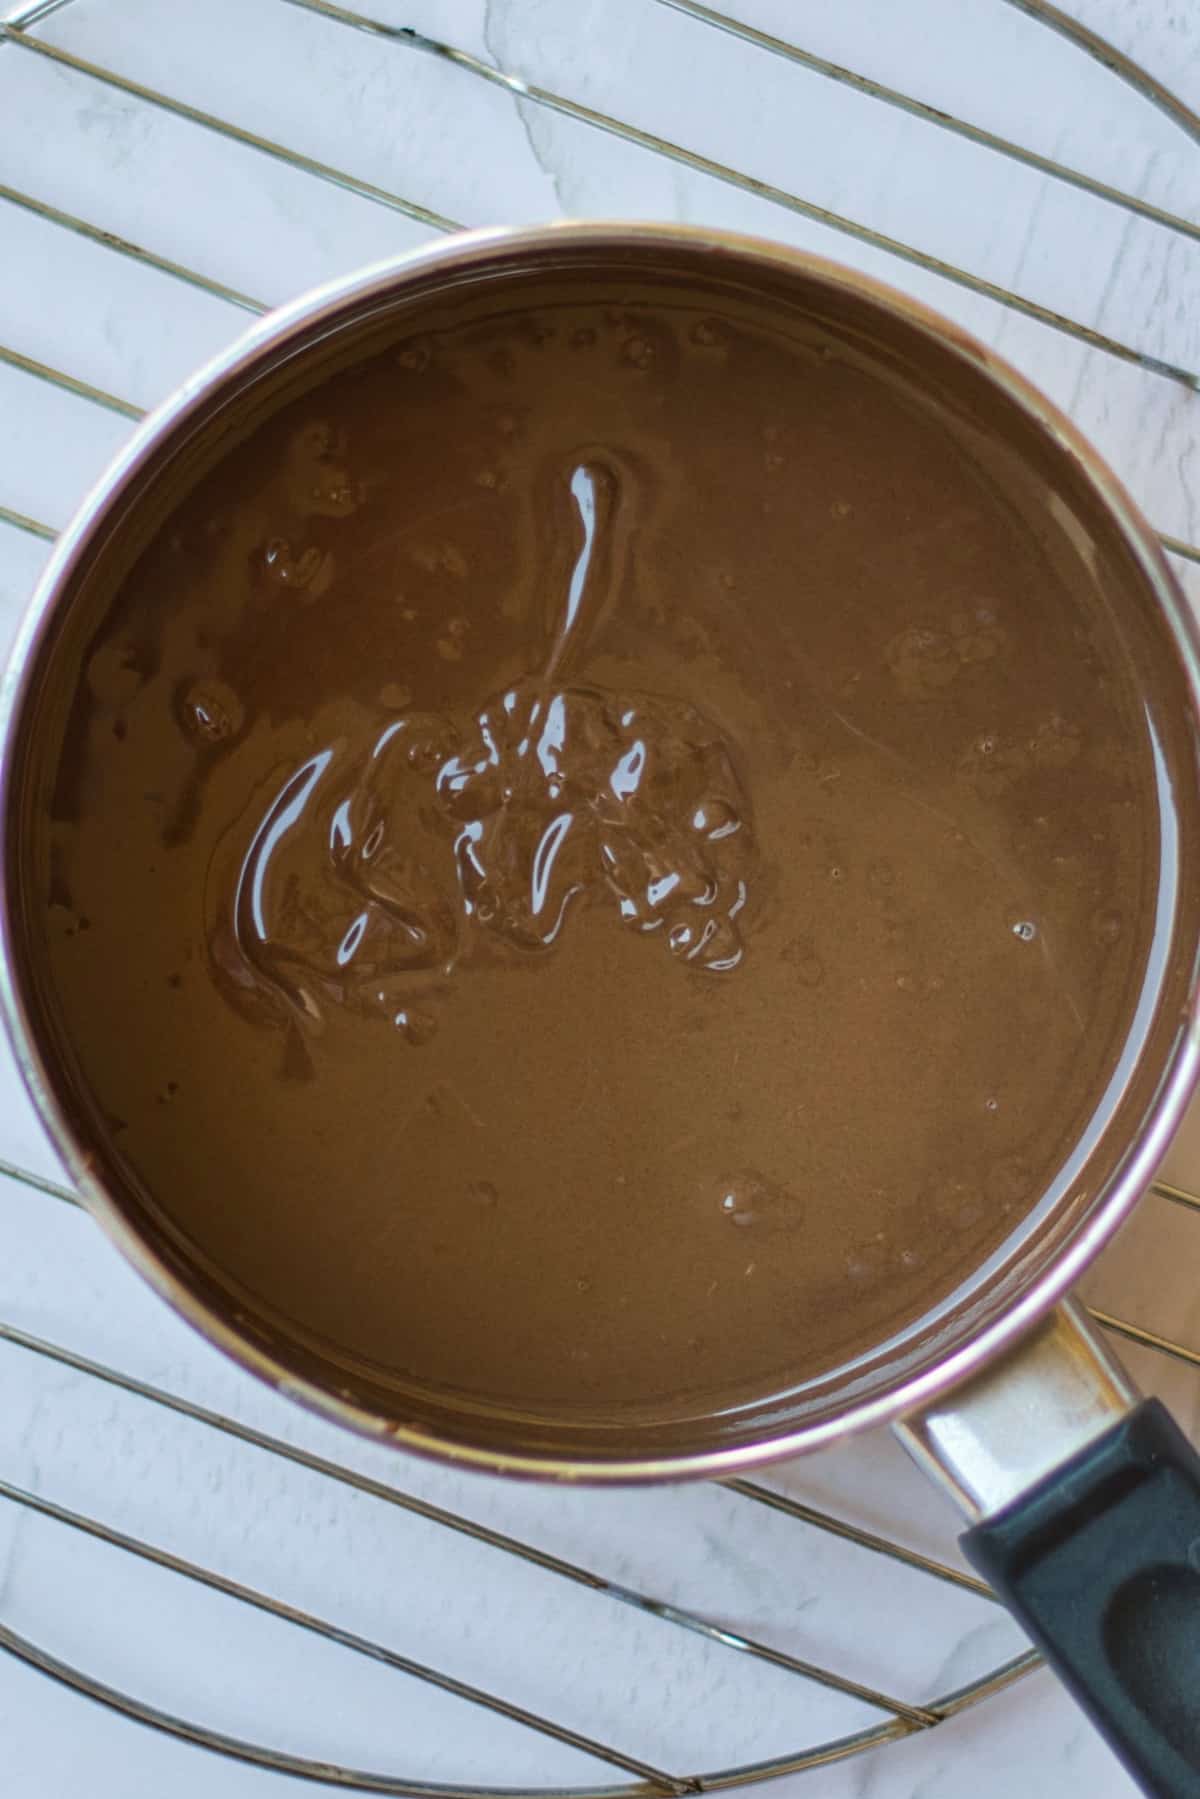 Heavy cream and chocolate in pan.